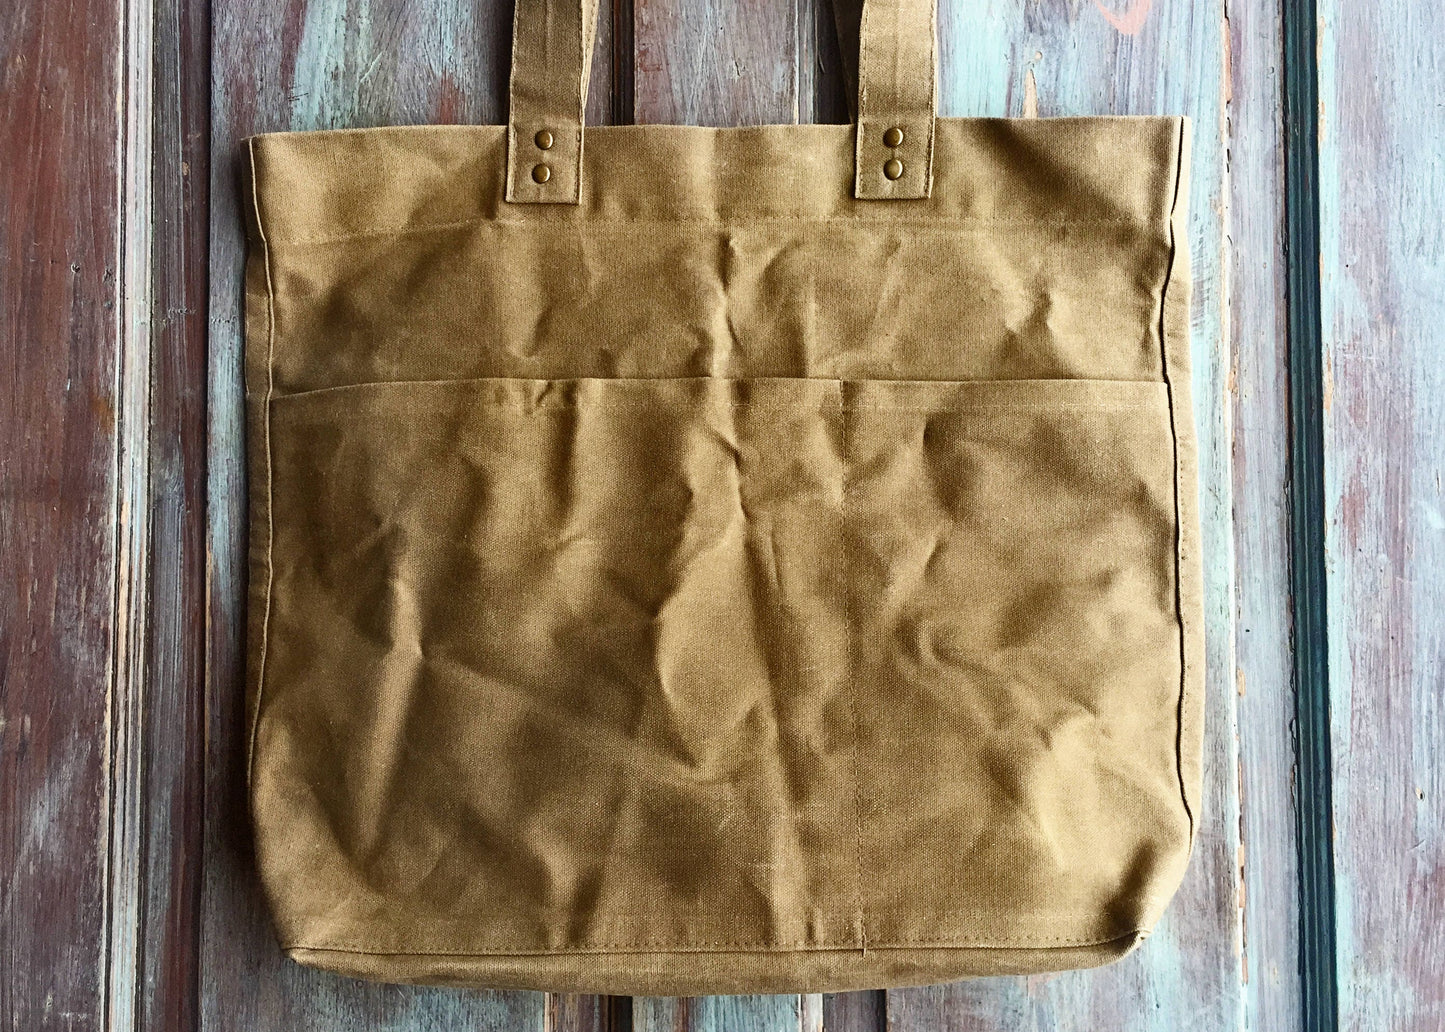 Waxed Canvas Tote Bag, Large Waxed Canvas Tote, Market Bag, Diaper Bag, Laptop Bag, Hand Waxed Canvas in 24 colors,